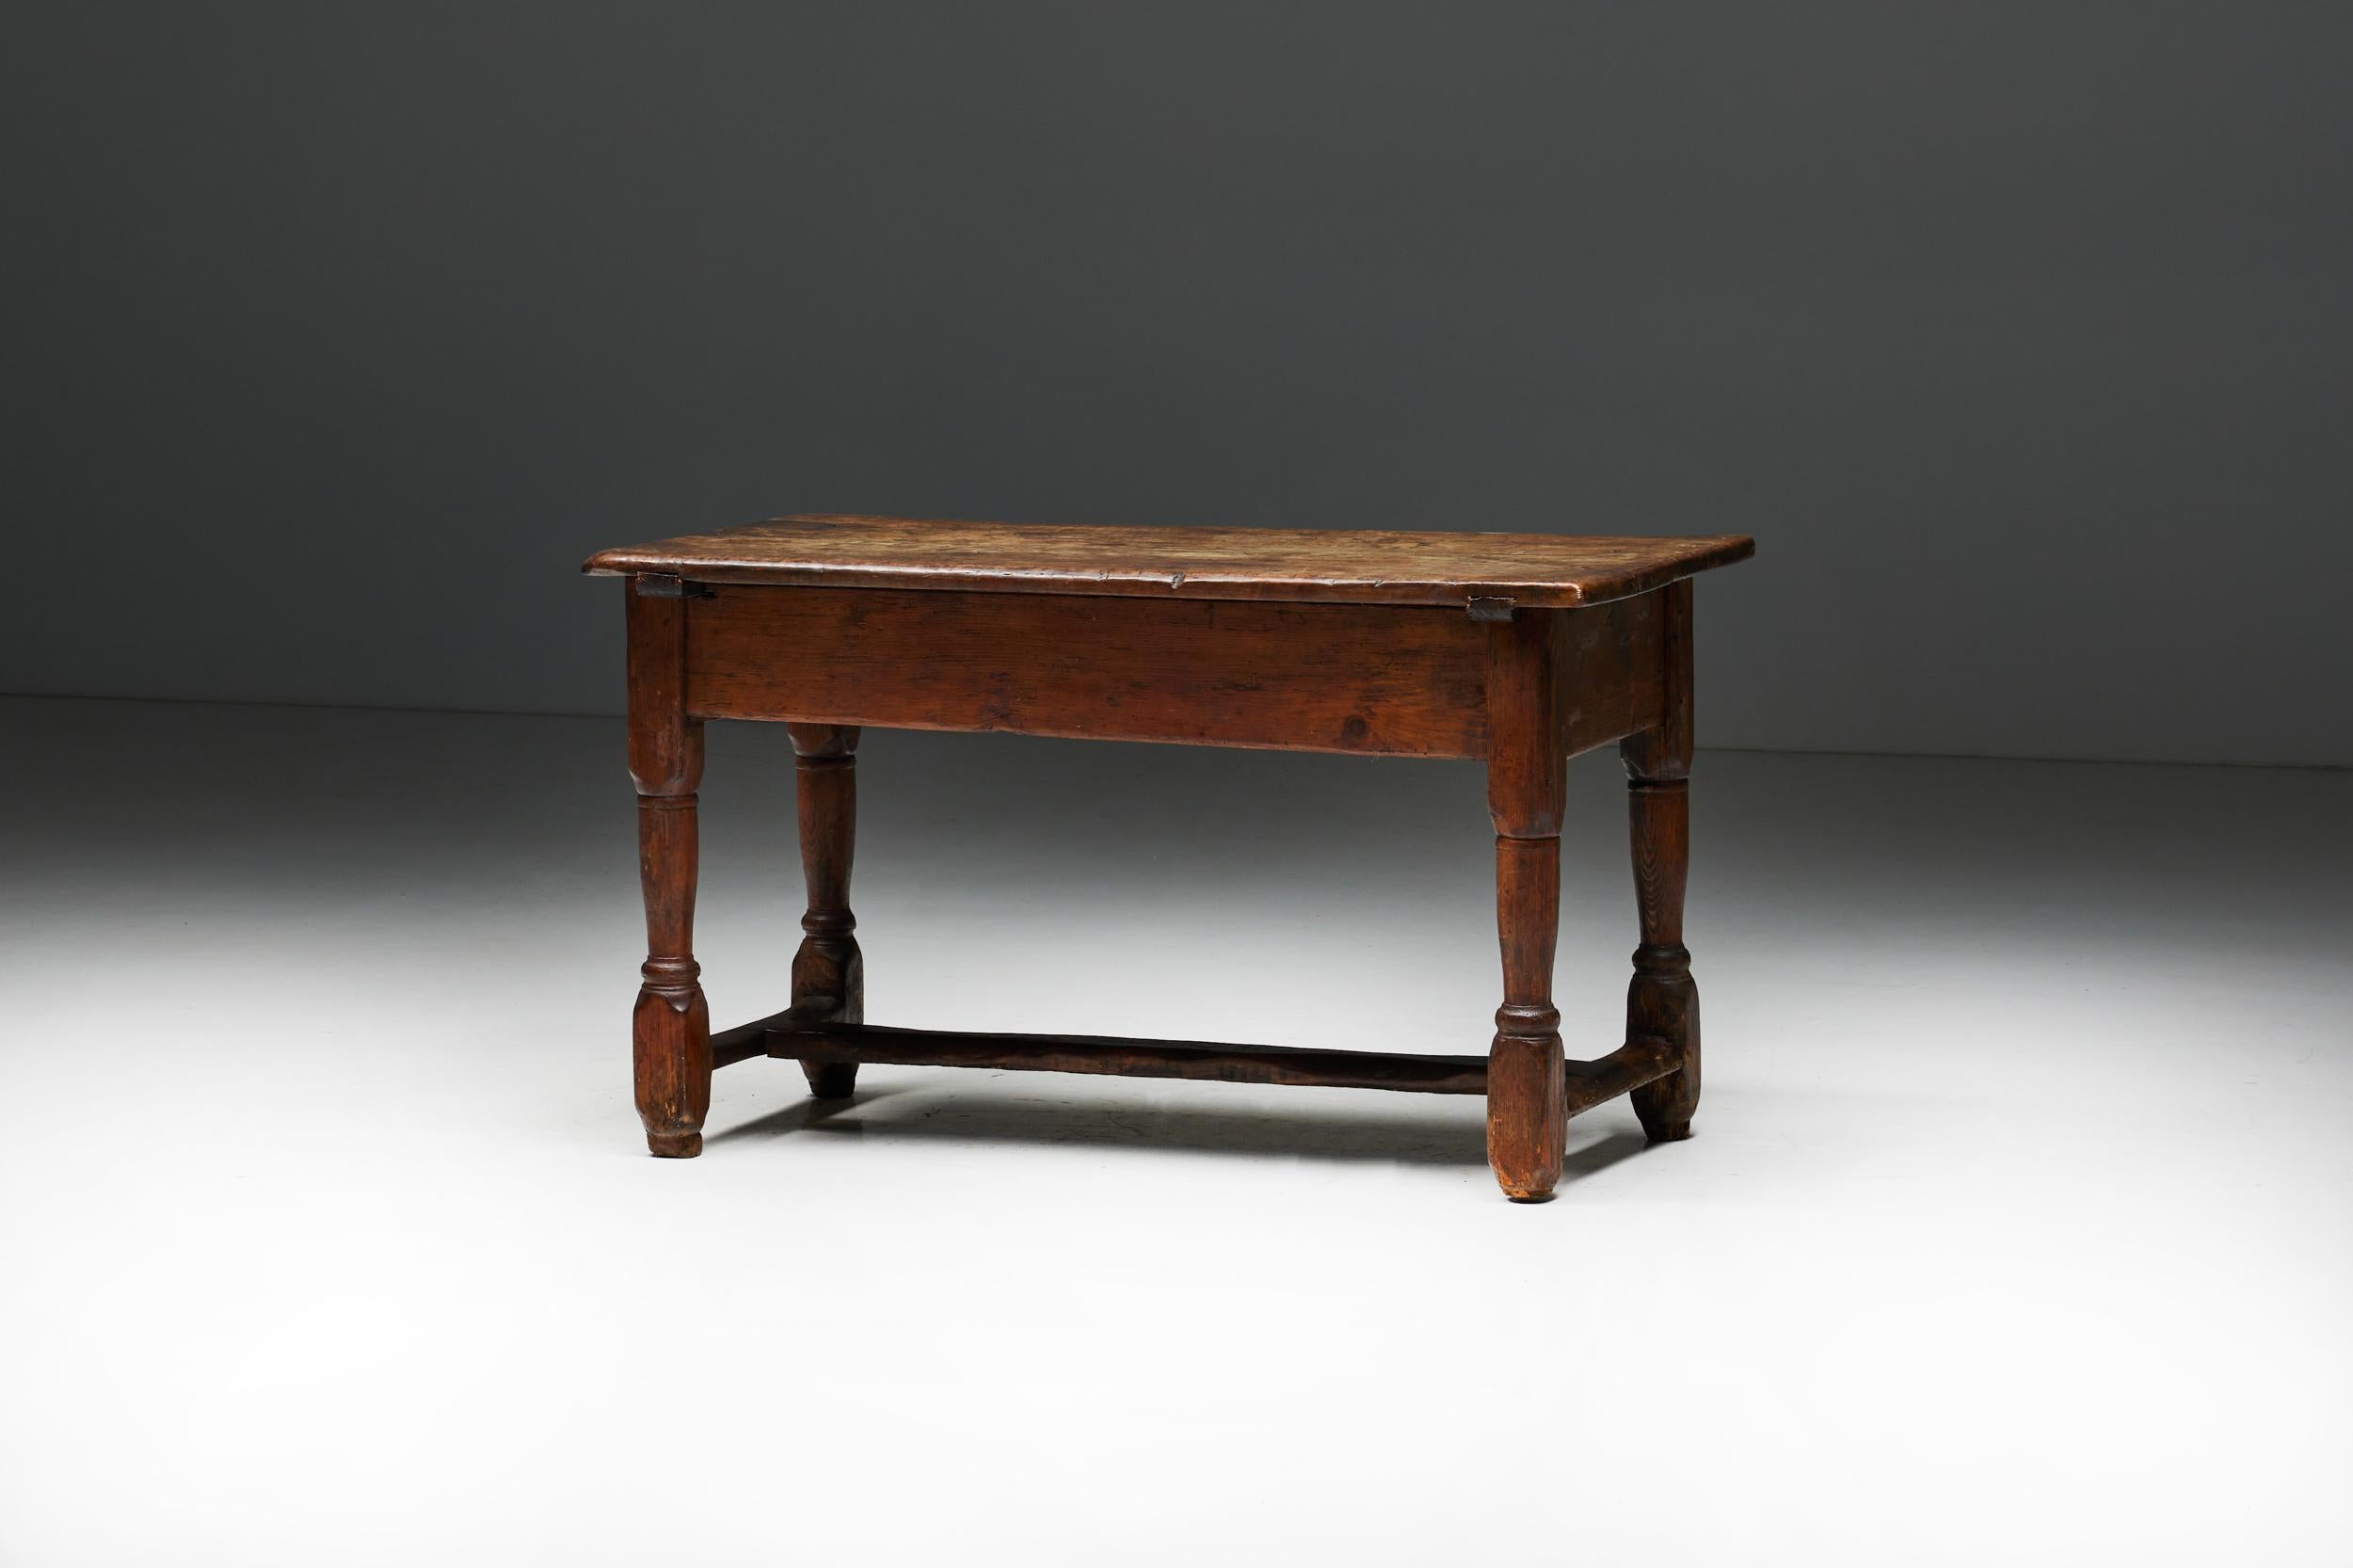 Rustic Art Populaire Writing Table, France, Early 20th Century For Sale 2